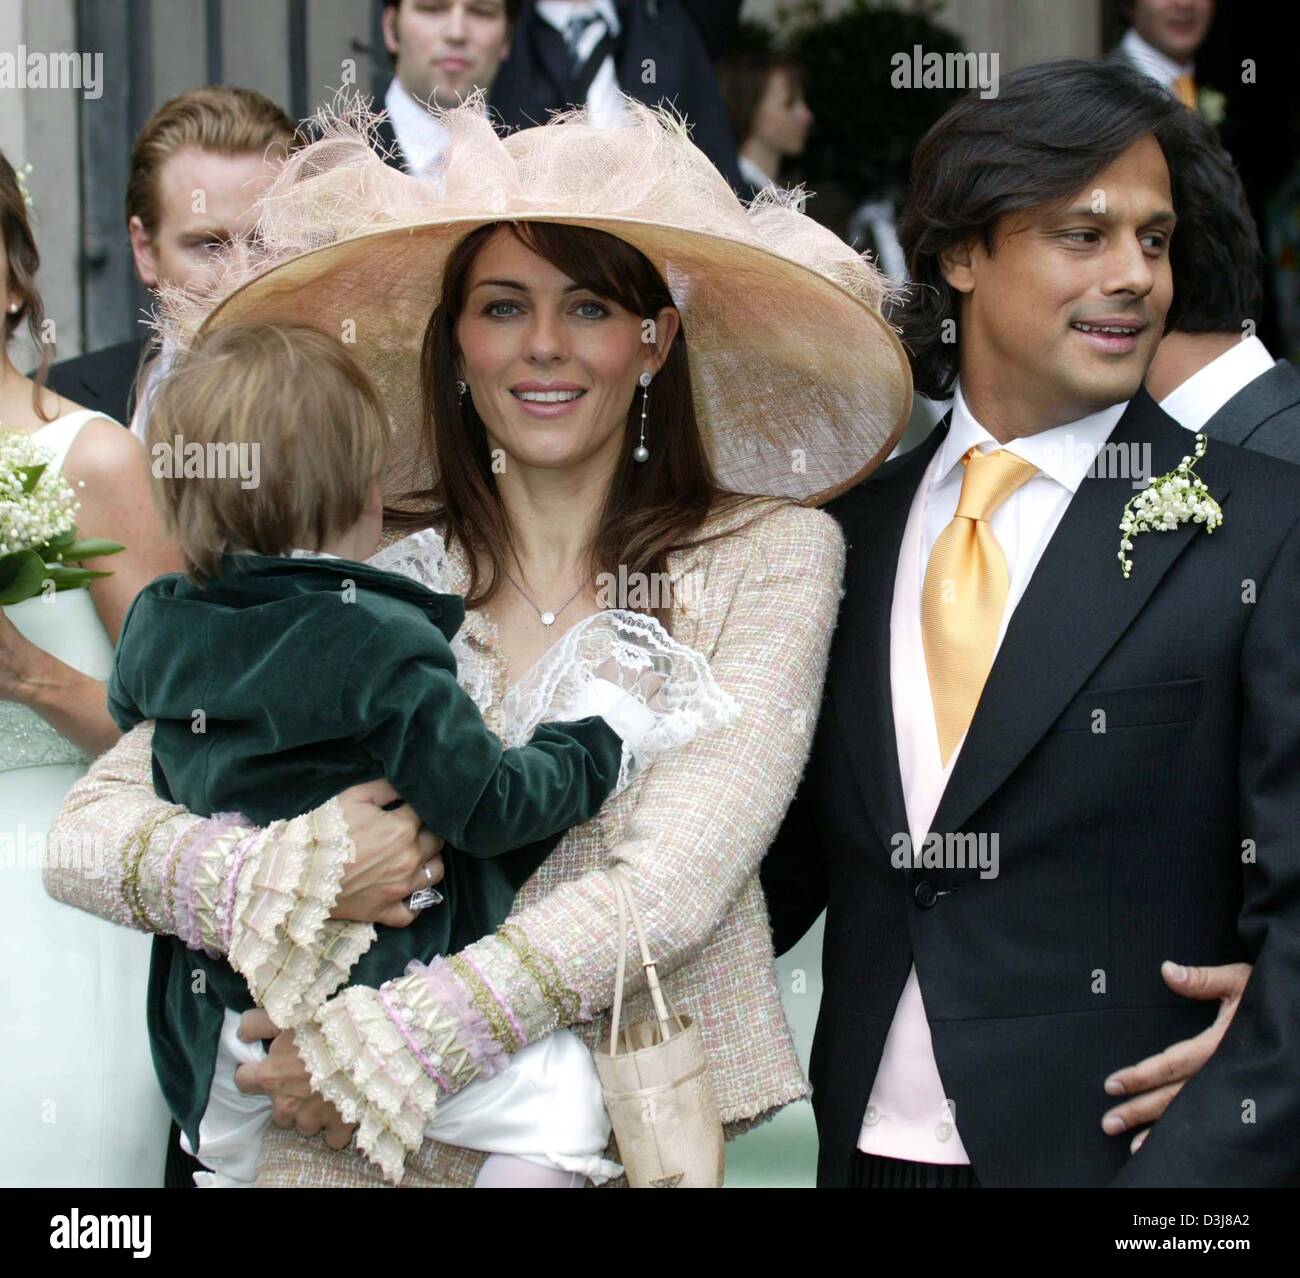 (dpa) - British actress and model Elizabeth Hurley (C) holds her son Damian in her arms as she arrives with her boyfriend Arun Nayer (R) to the wedding of Sven Ley and Zoe Appleyard at the cathedral in Salzburg, Austria, 8 May 2004. Stock Photo